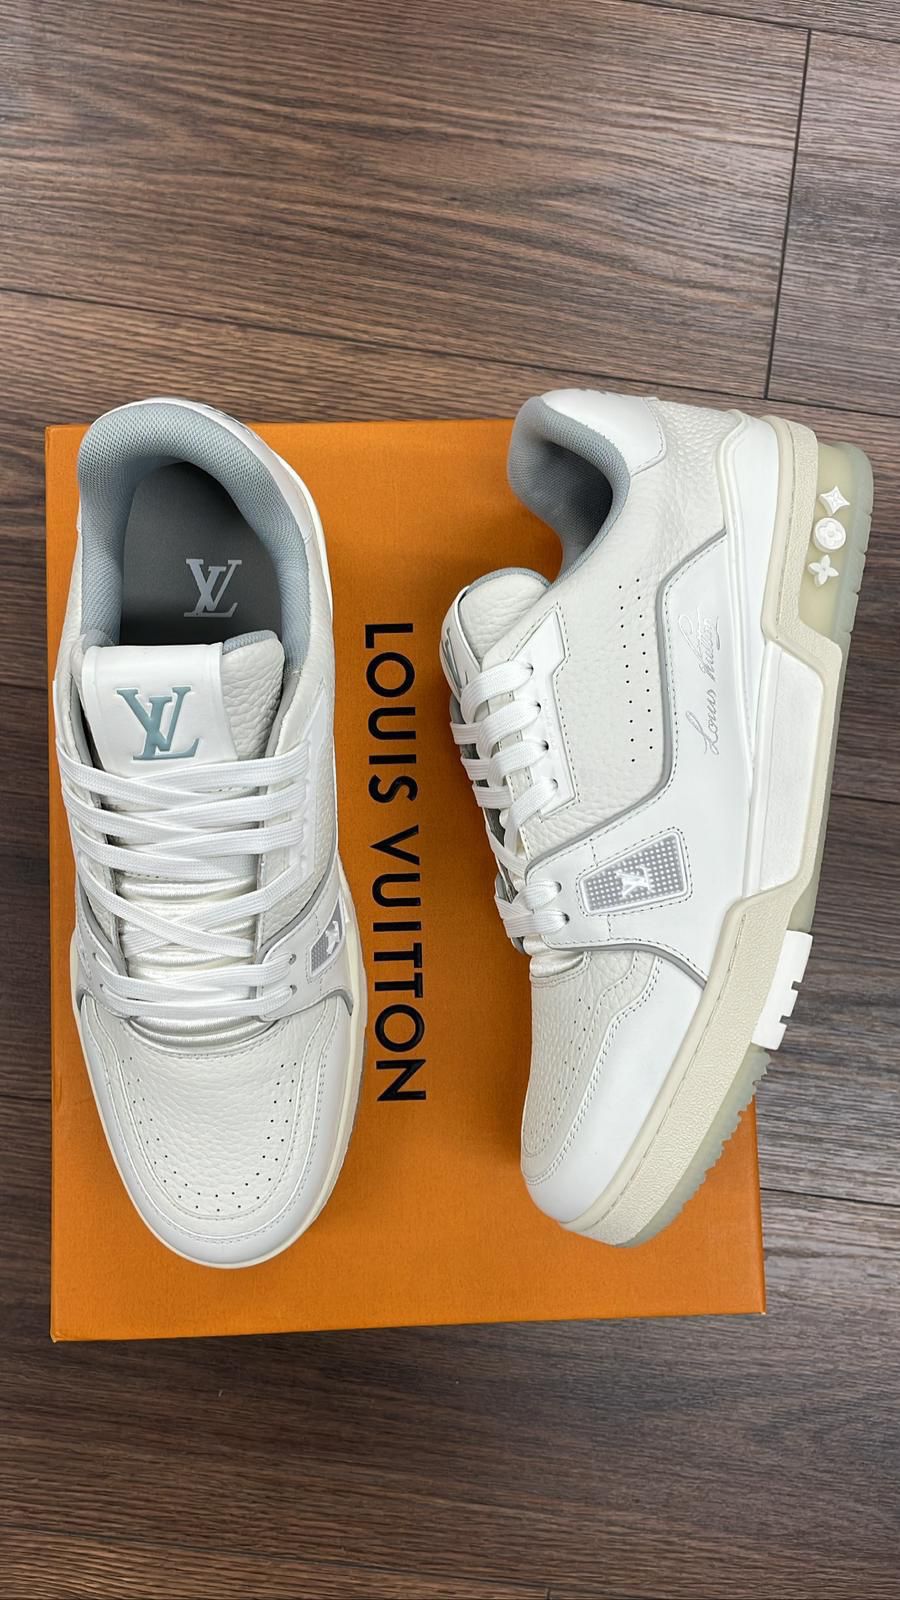 Black Louis Vuitton Luxembourg Sneaker S9 for Sale in New York, NY - OfferUp